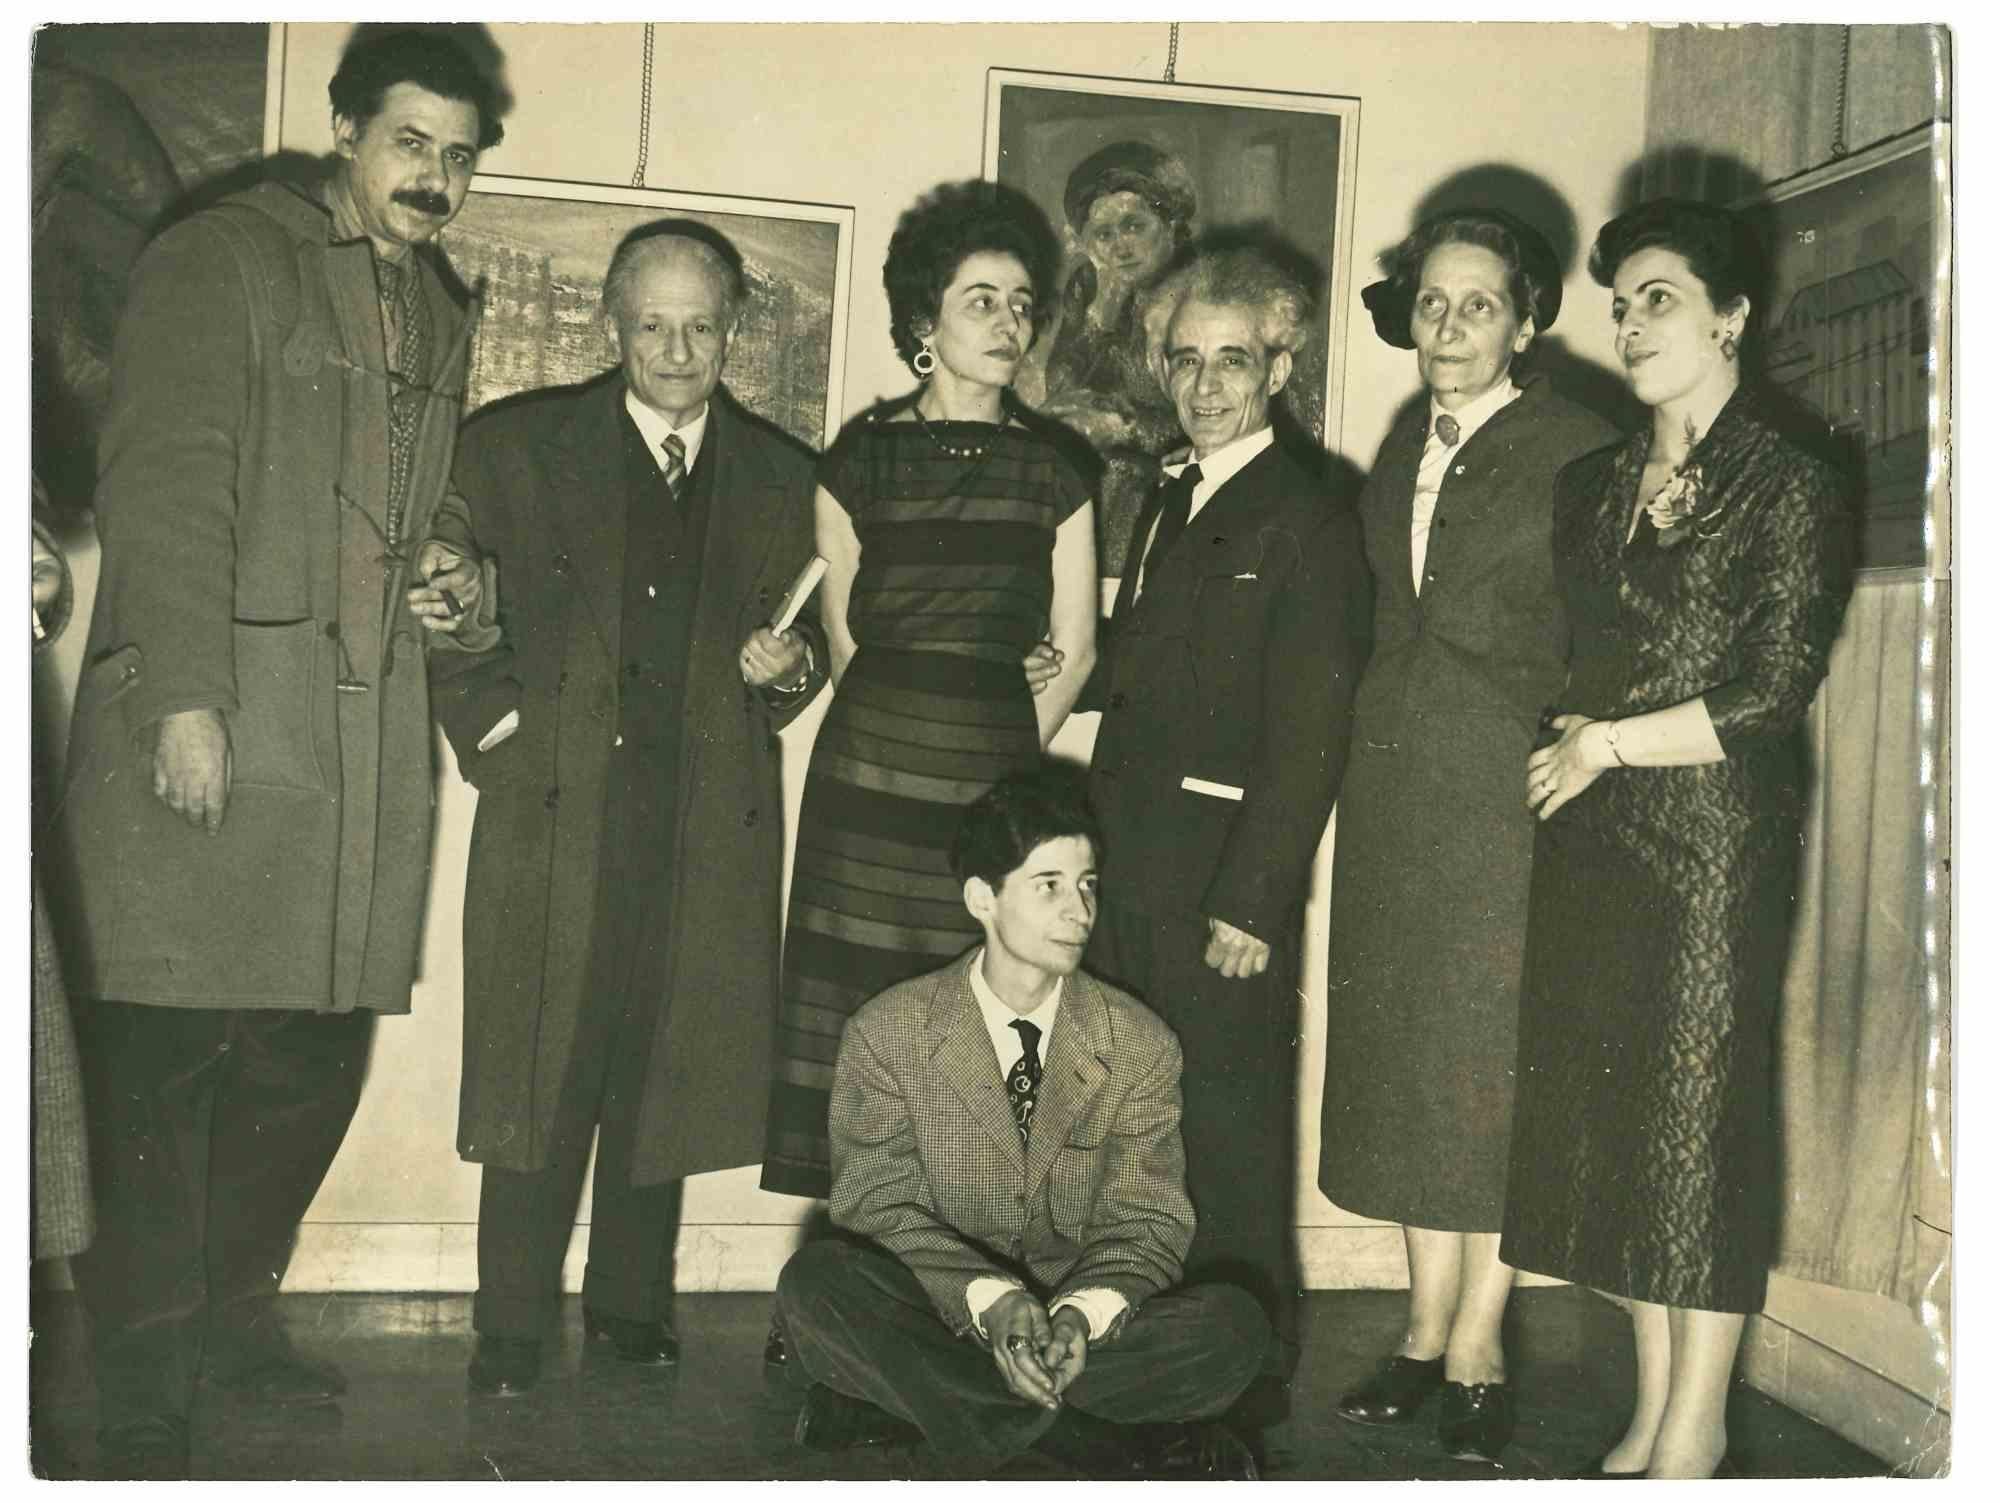 Unknown Portrait Photograph - Opening Exhibition - Life in Italy in 1960s      